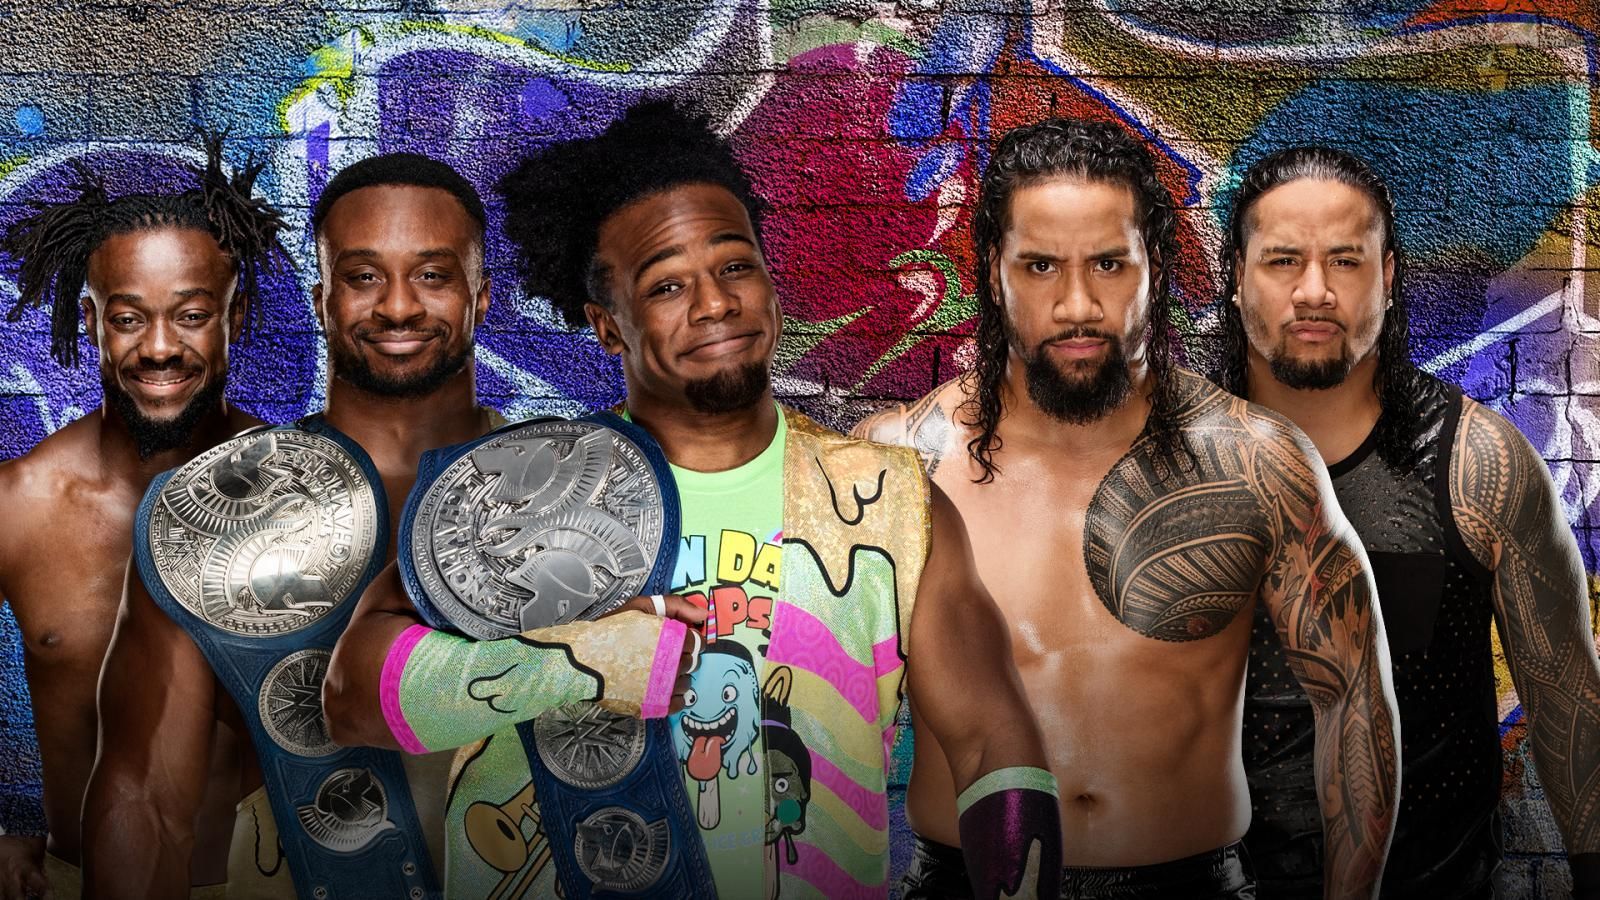 WWE SummerSlam 2017: The Usos vs. The New Day full match preview